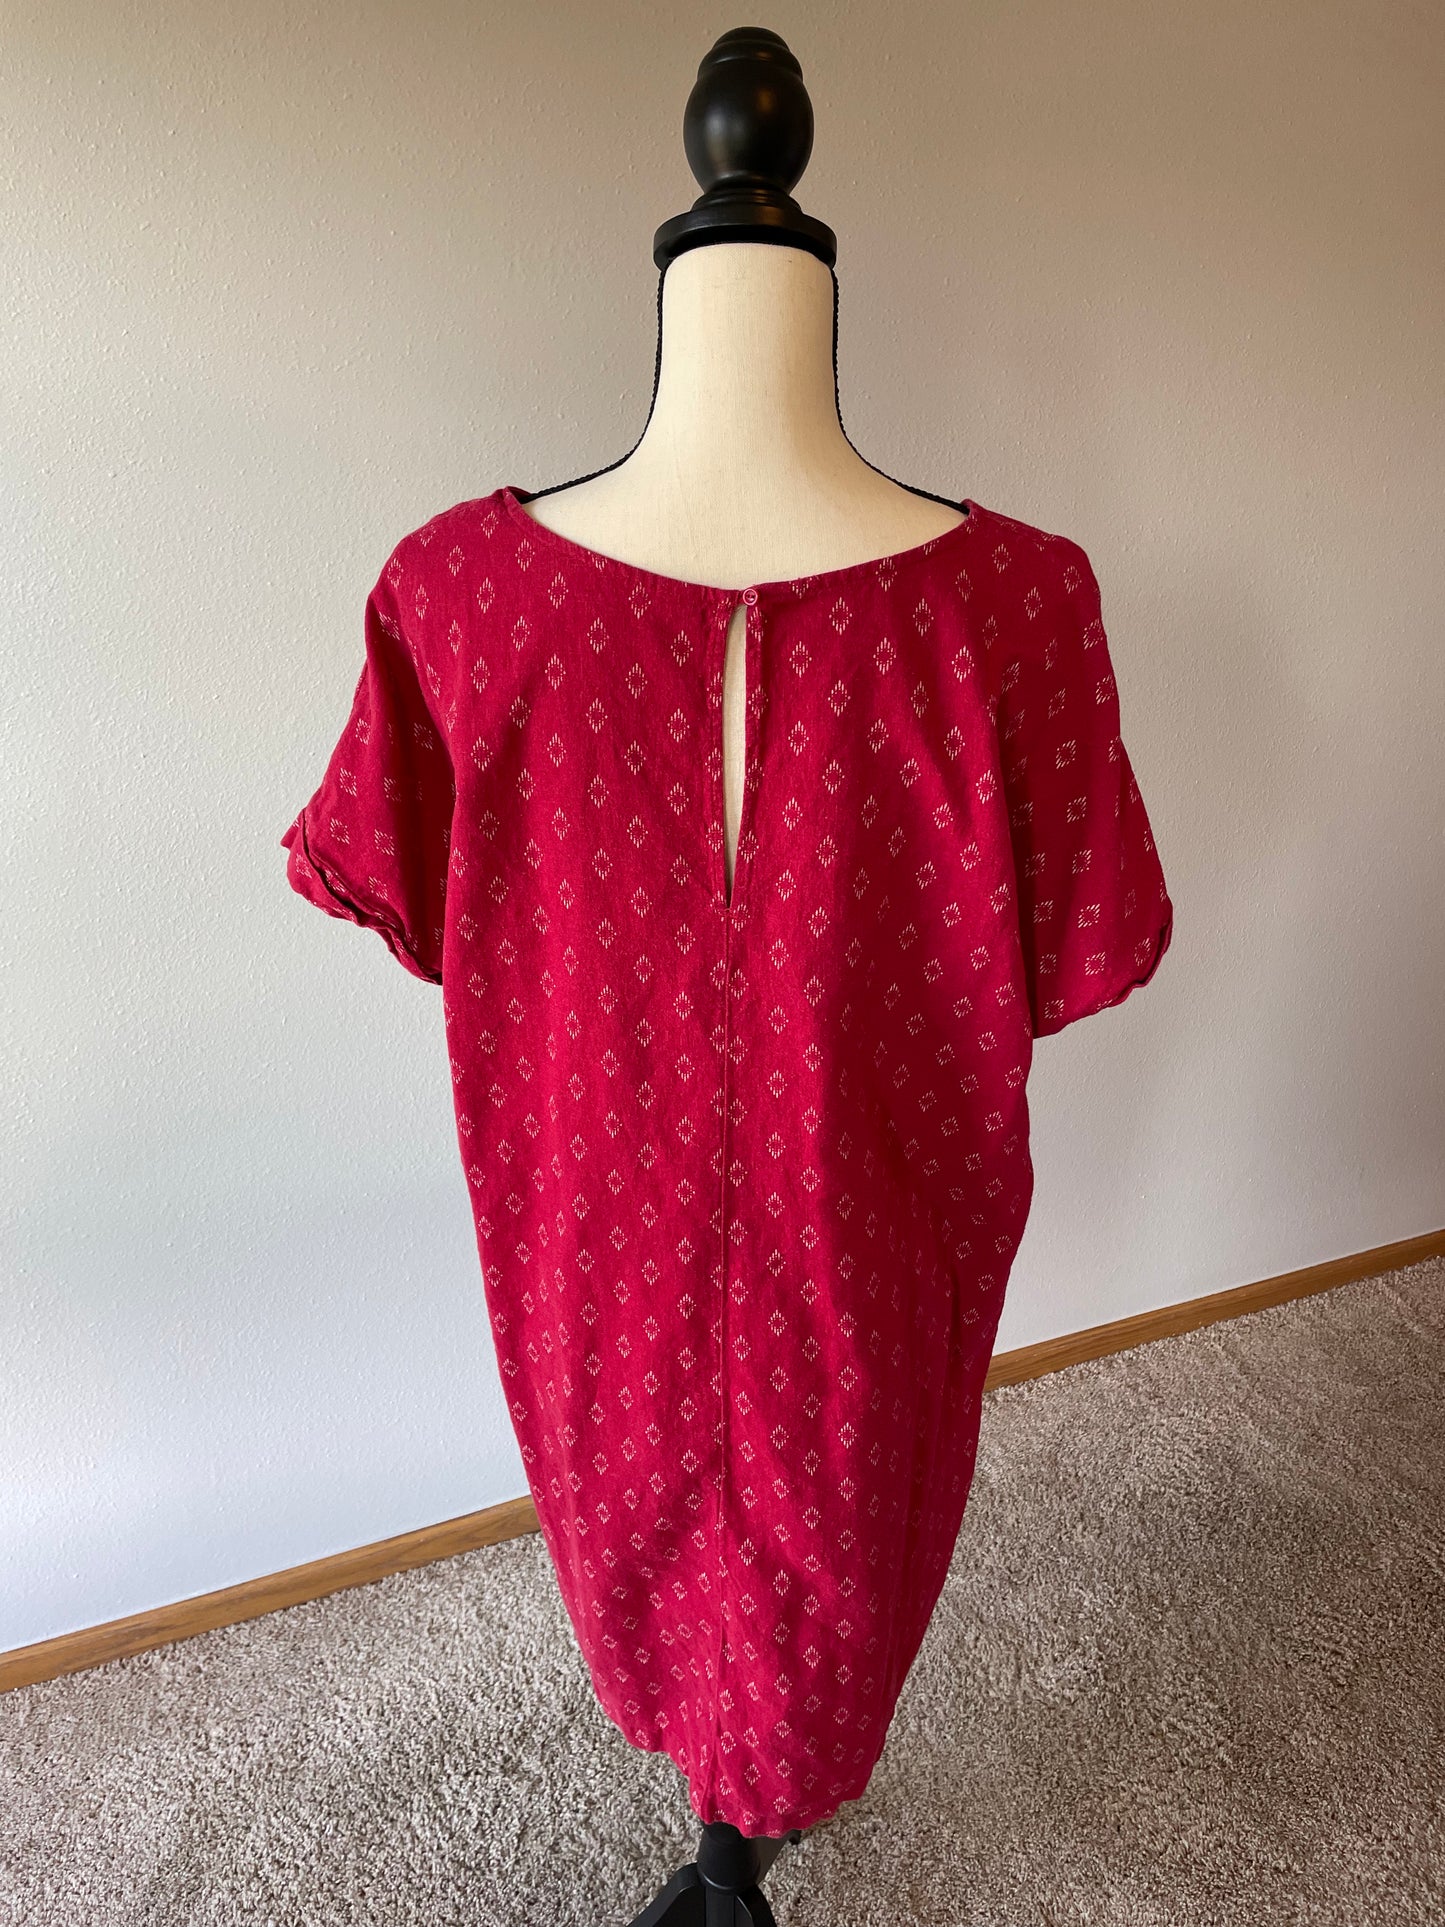 Old Navy Red Shift Dress (XL)